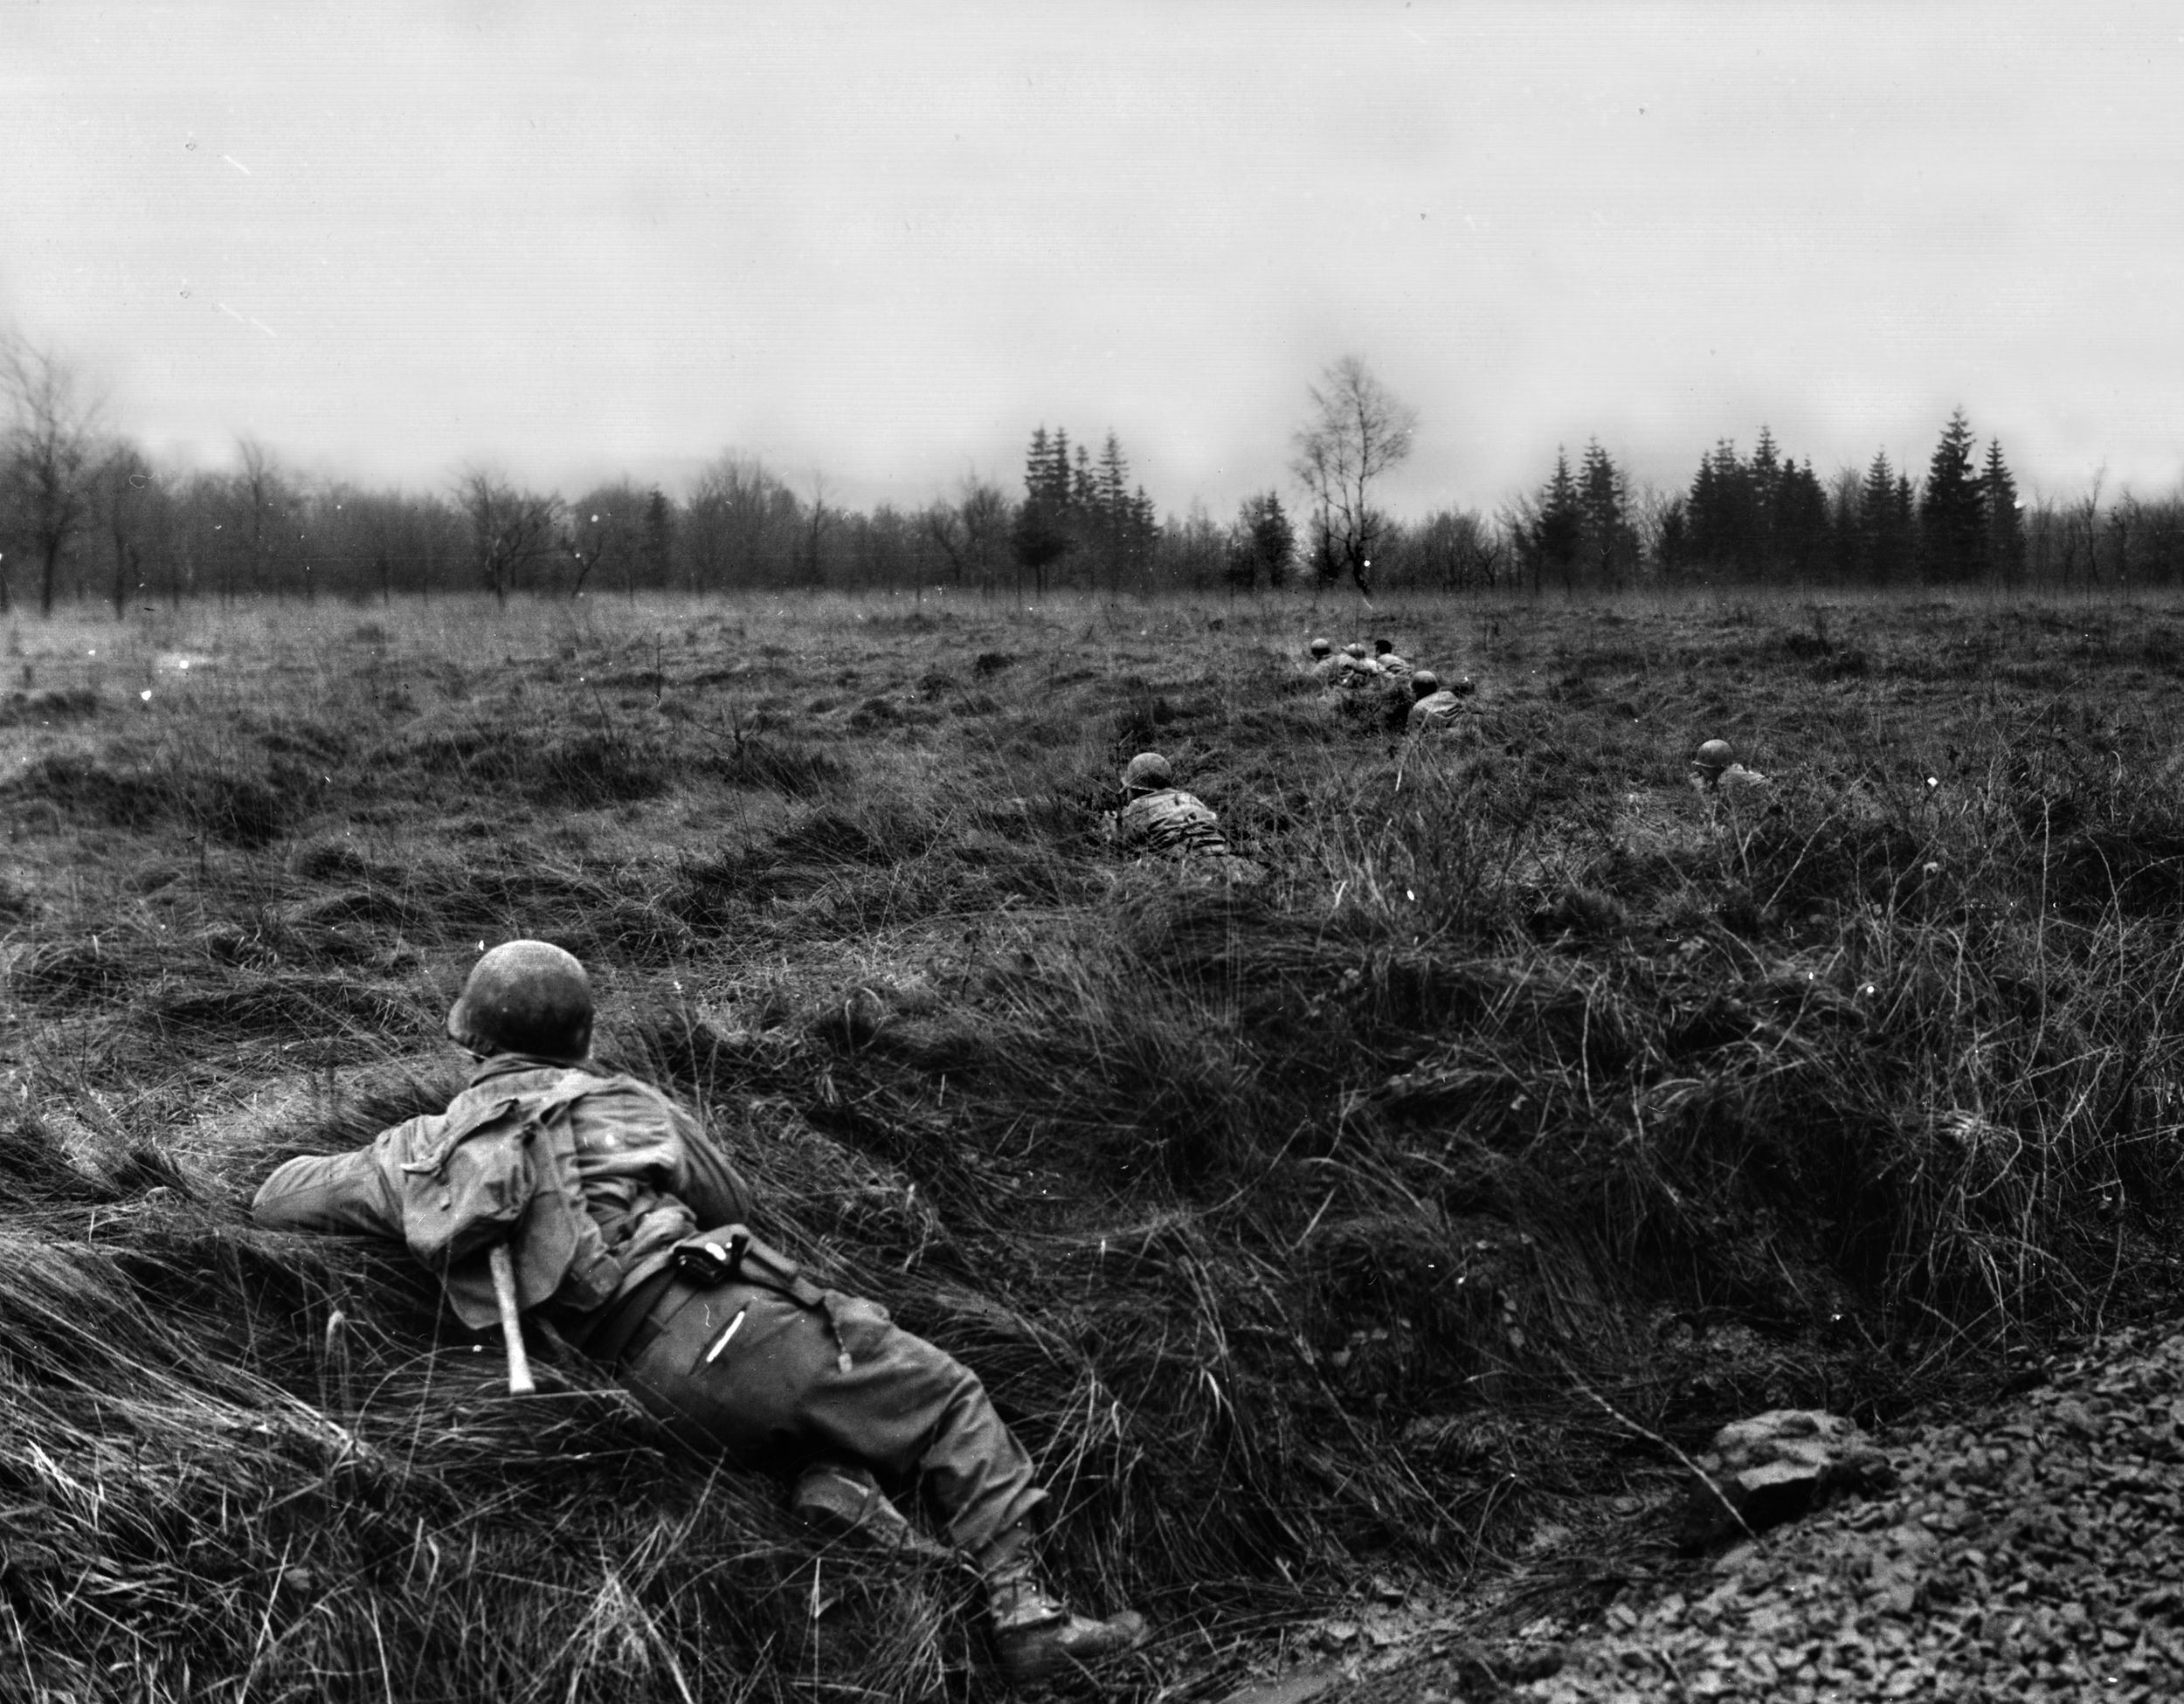 A lone GI scans the Belgian countryside for advancing Germans during the first days of the Battle of the Bulge.